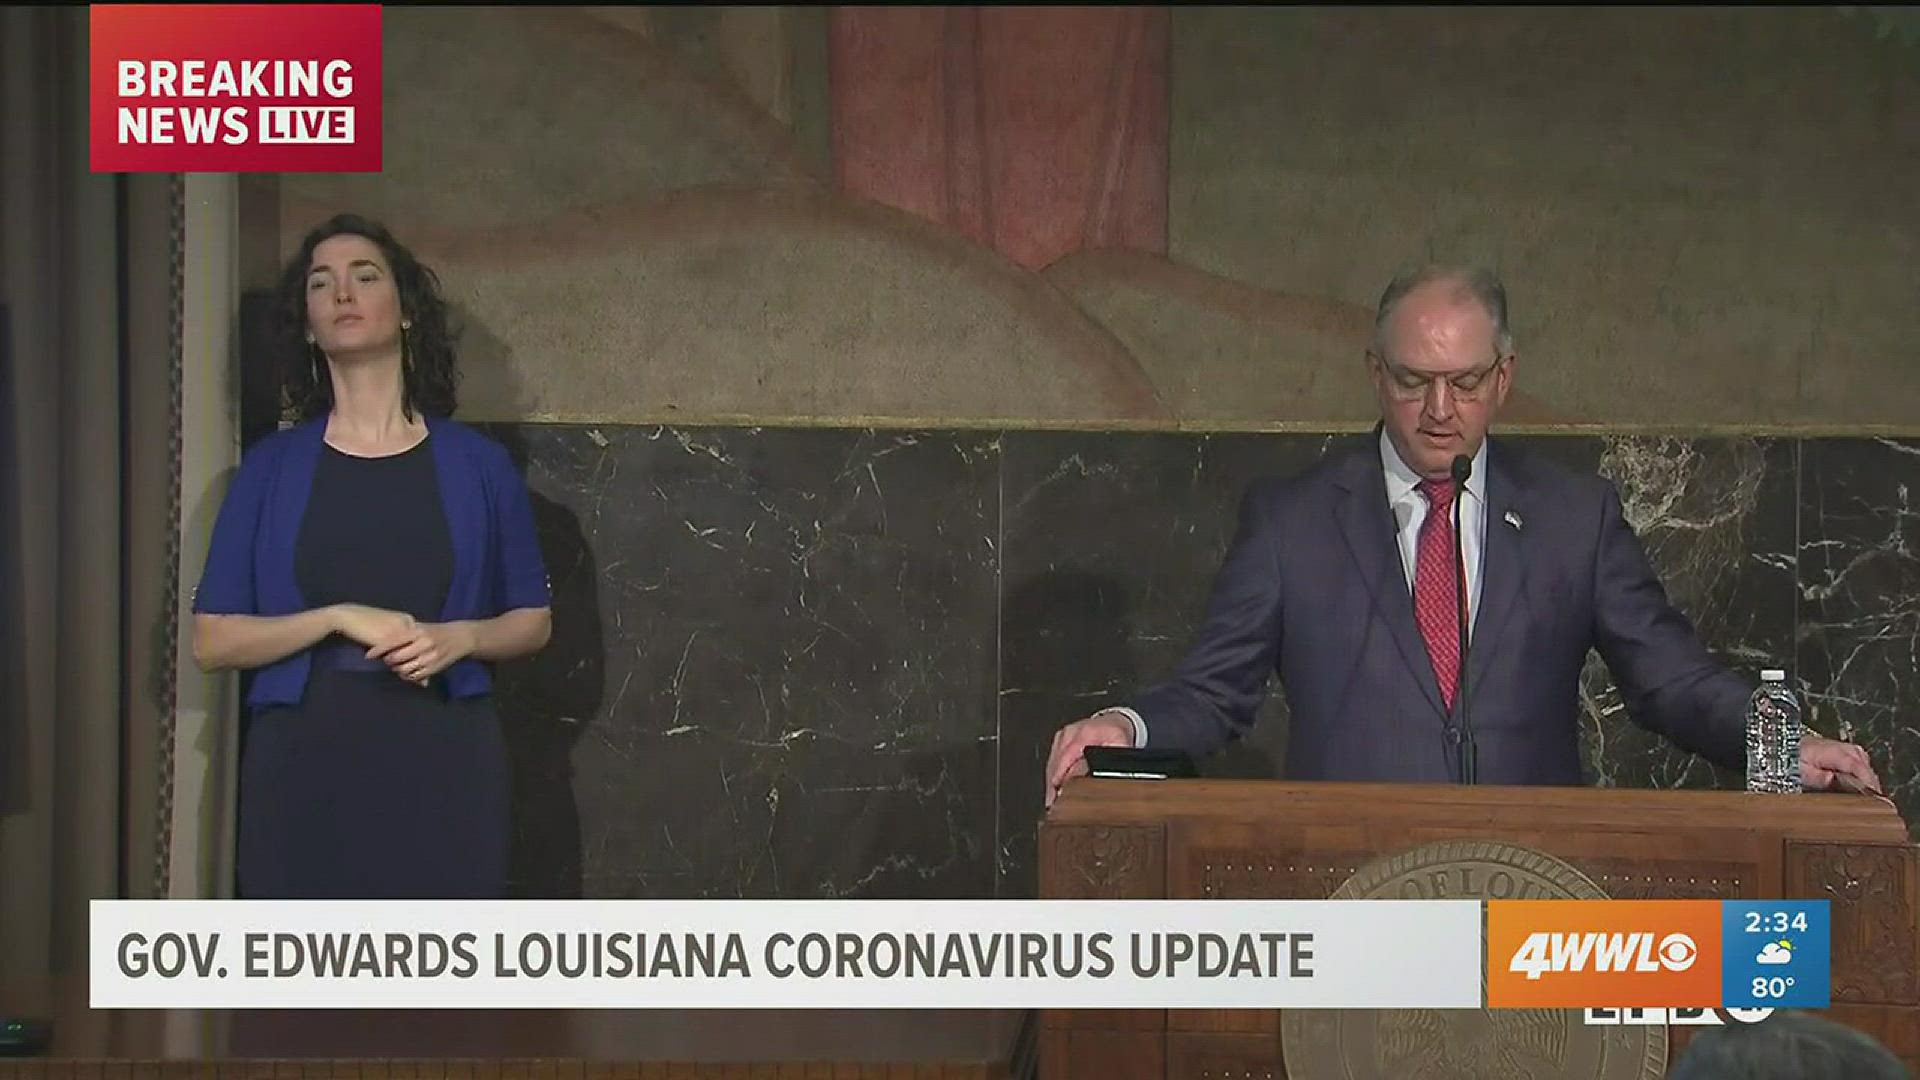 Louisiana Governor John Bel Edwards announced the phased reopening of the state starting Friday, May 15.